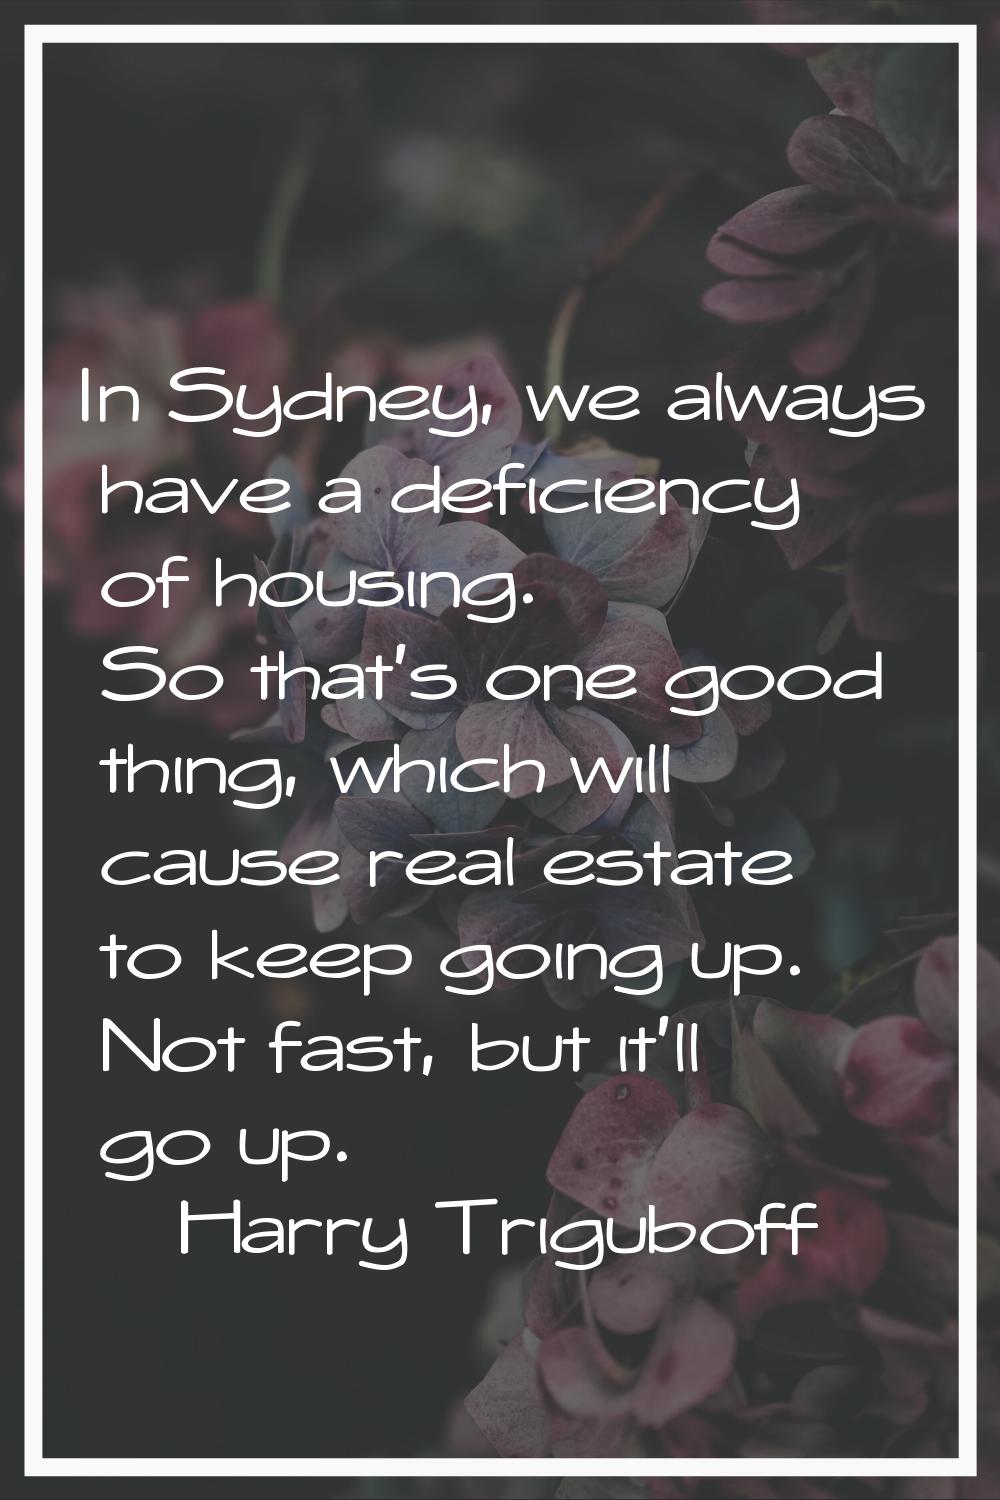 In Sydney, we always have a deficiency of housing. So that's one good thing, which will cause real 